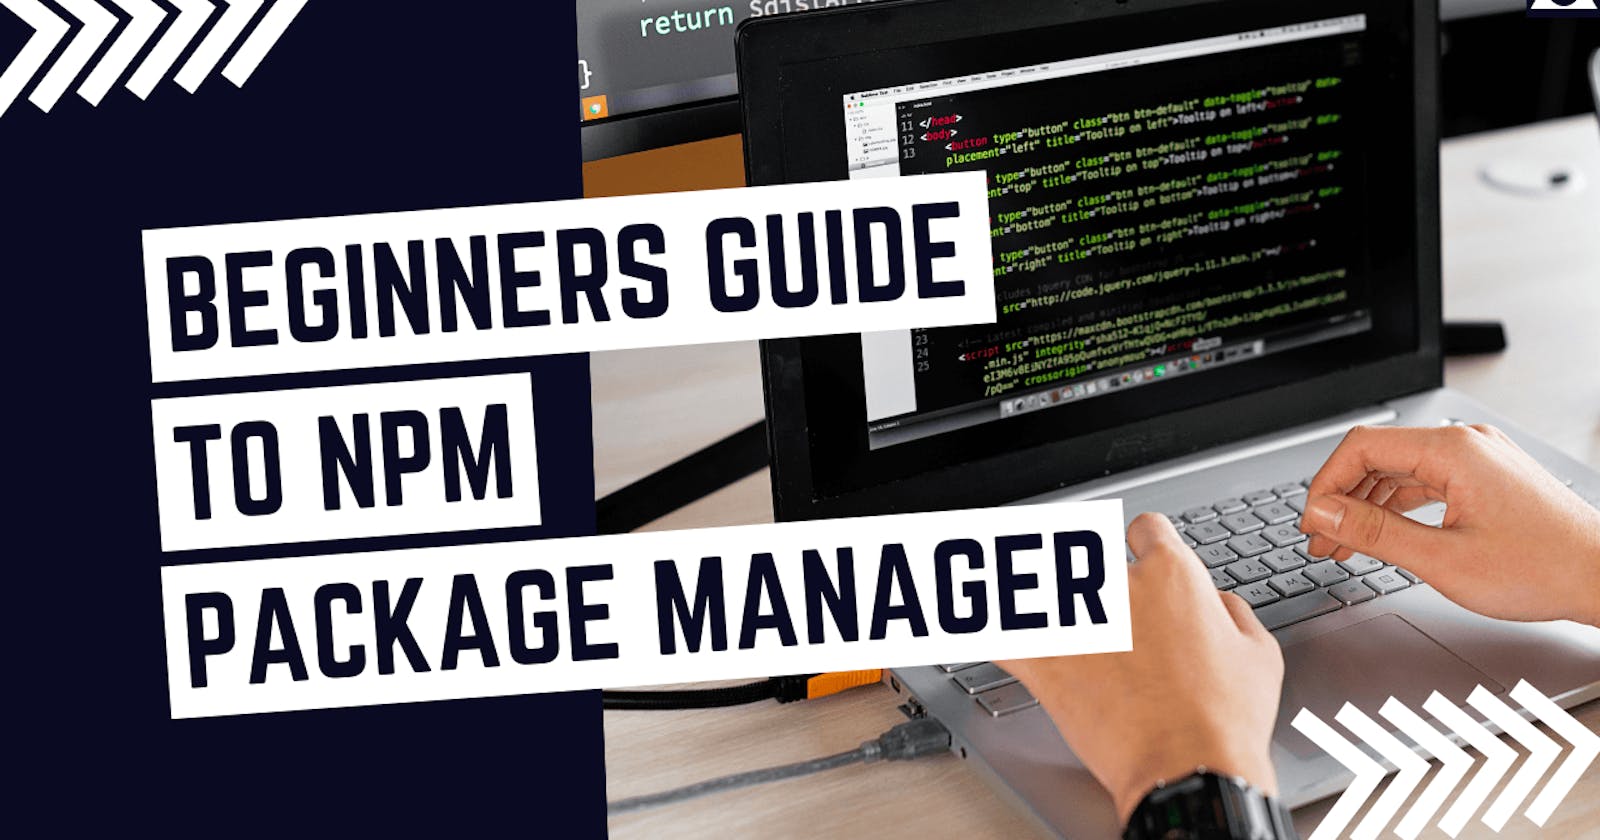 Beginners Guide to NPM Package Manager